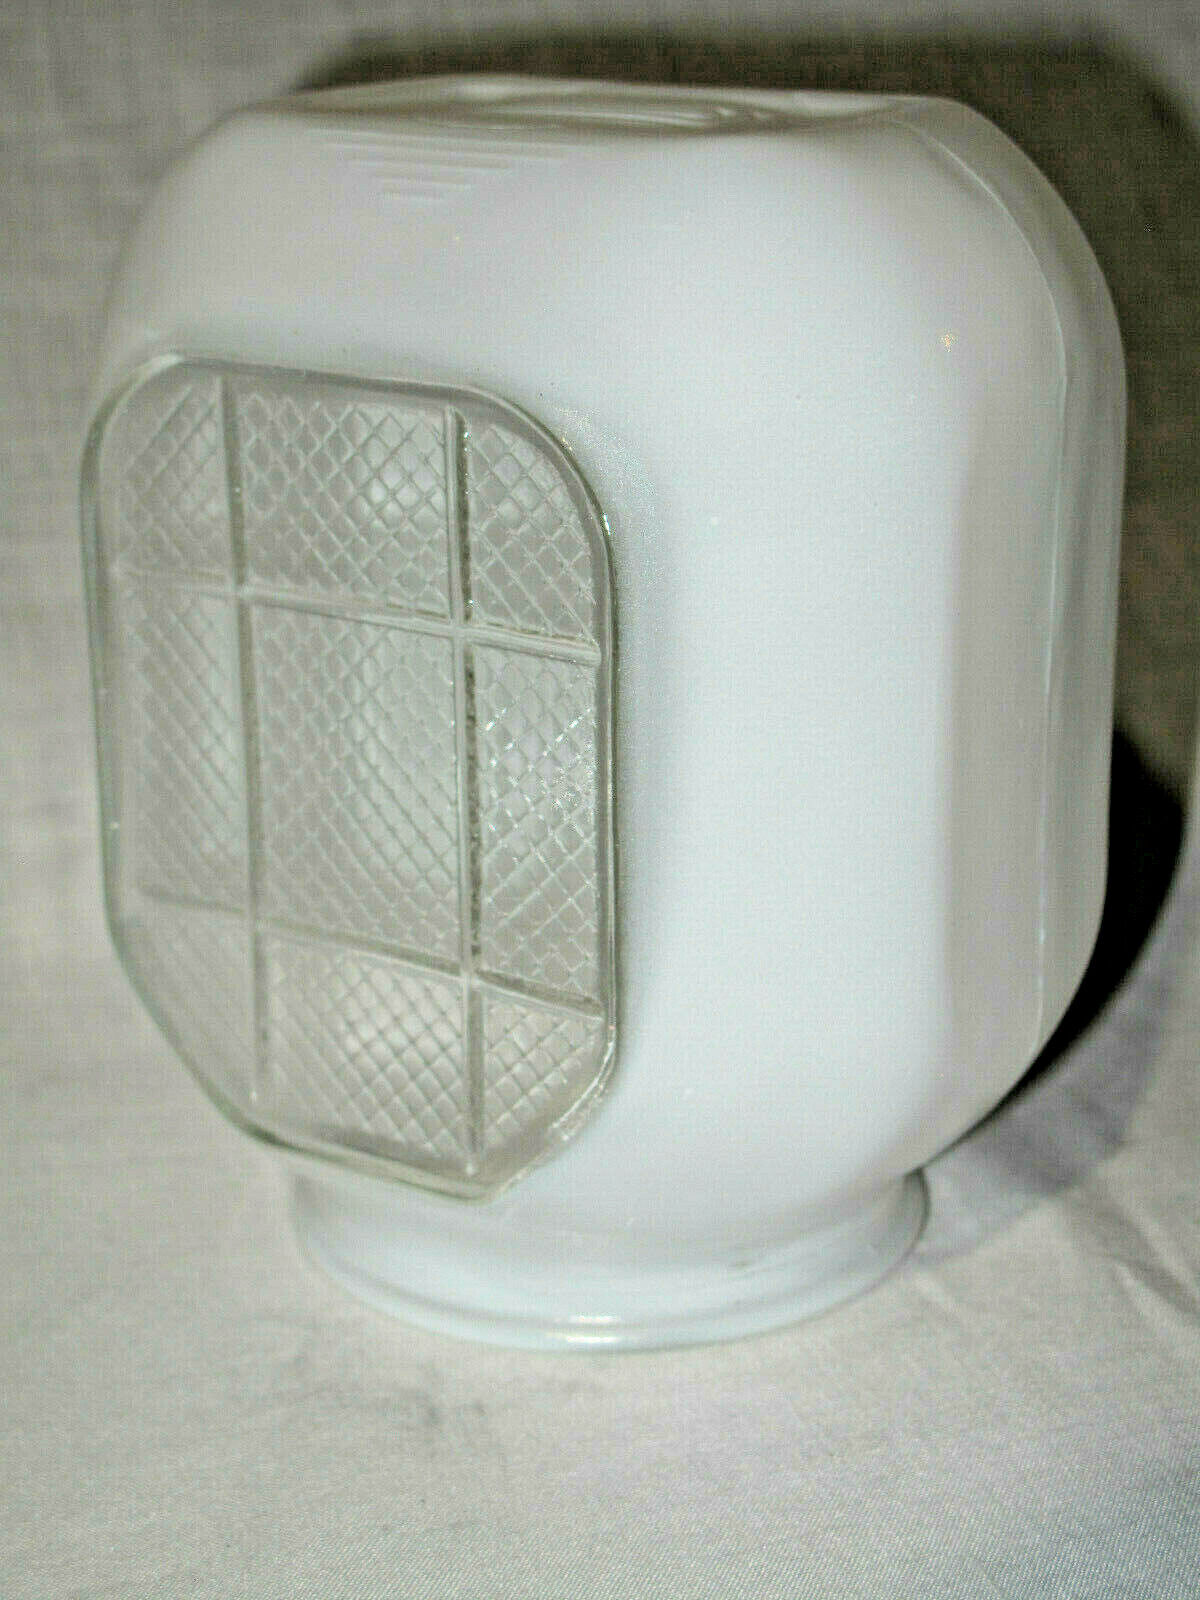 Vintage 1950s White Frosted Glass Light Shade Clear Glass Block Fixture Porch BR